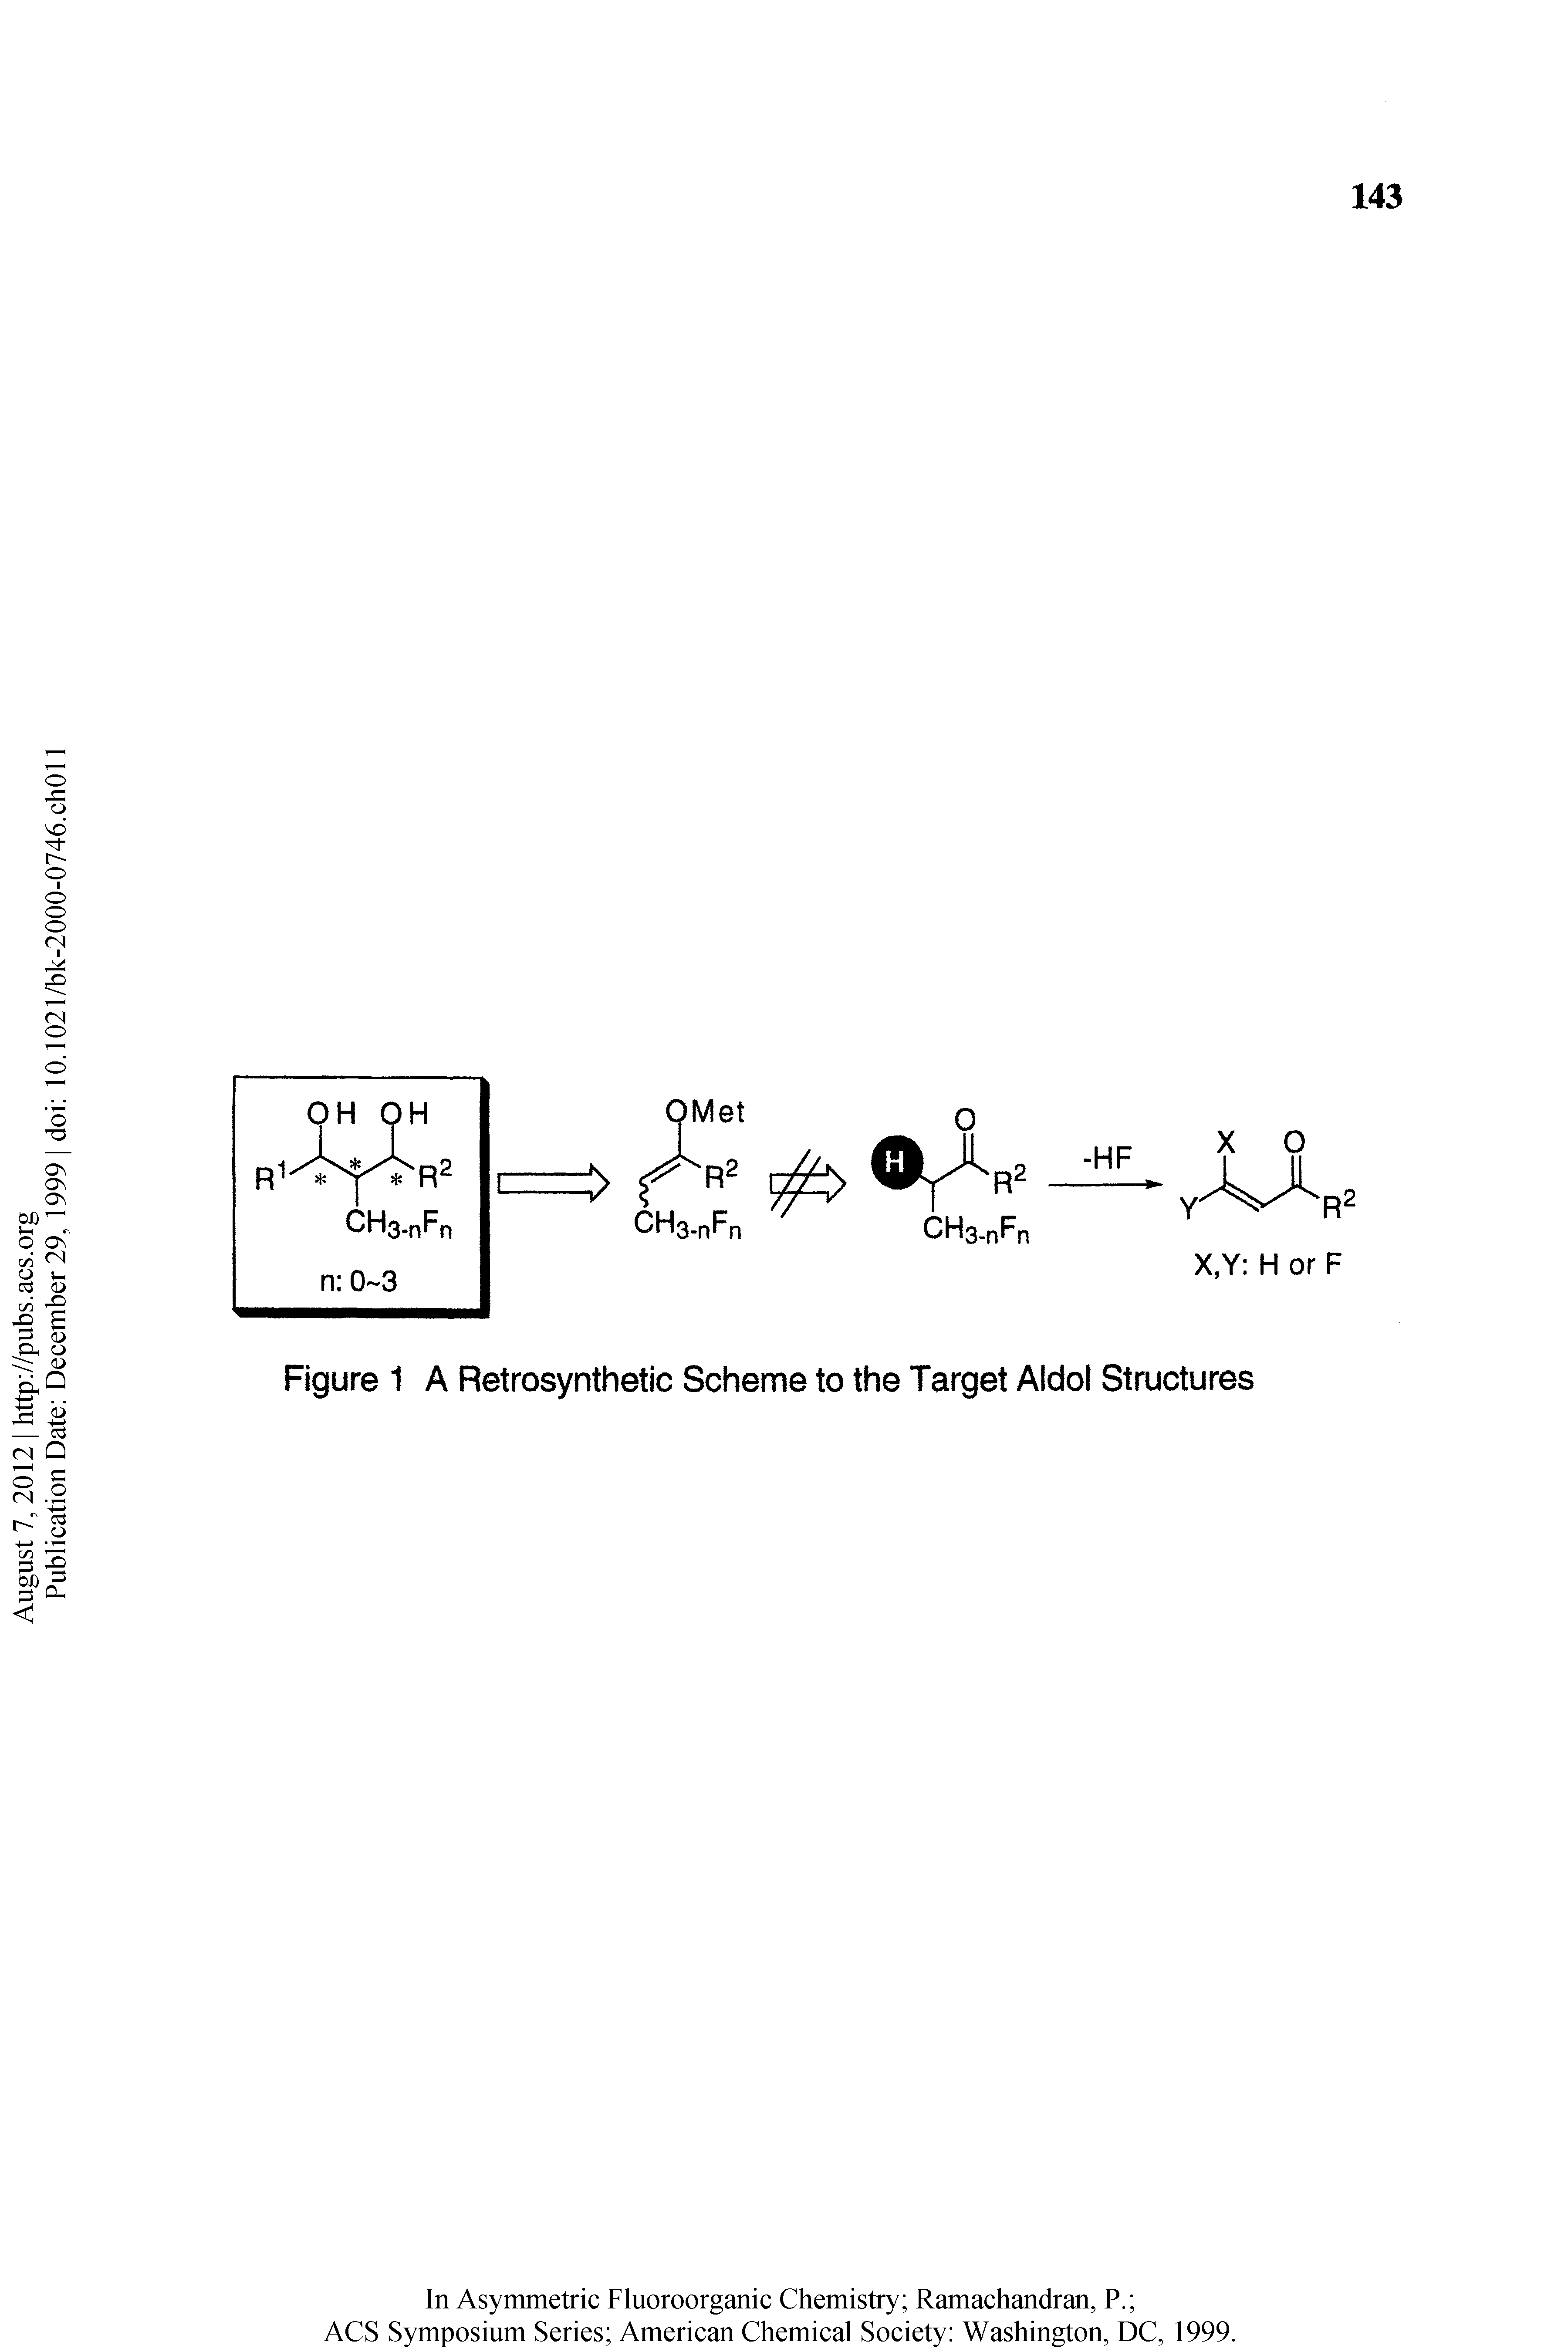 Figure 1 A Retrosynthetic Scheme to the Target Aldol Structures...